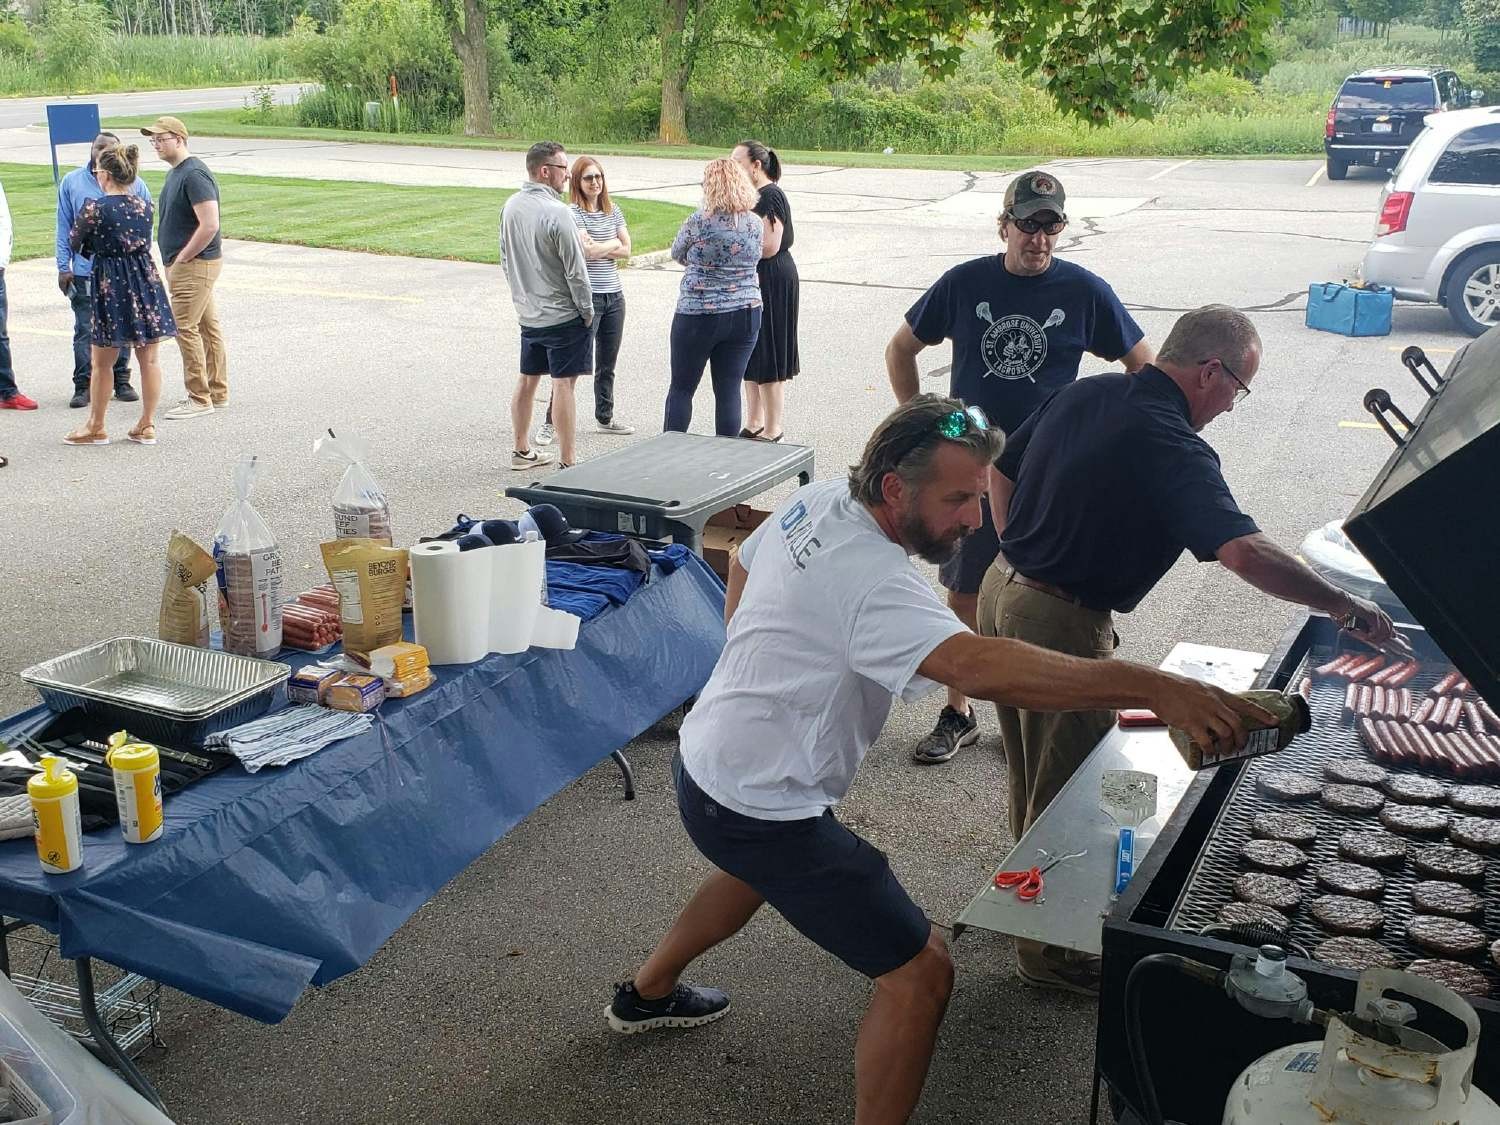 We love any reason to bring in food, especially in the Summer. This was a great day to celebrate our IDville friends. 